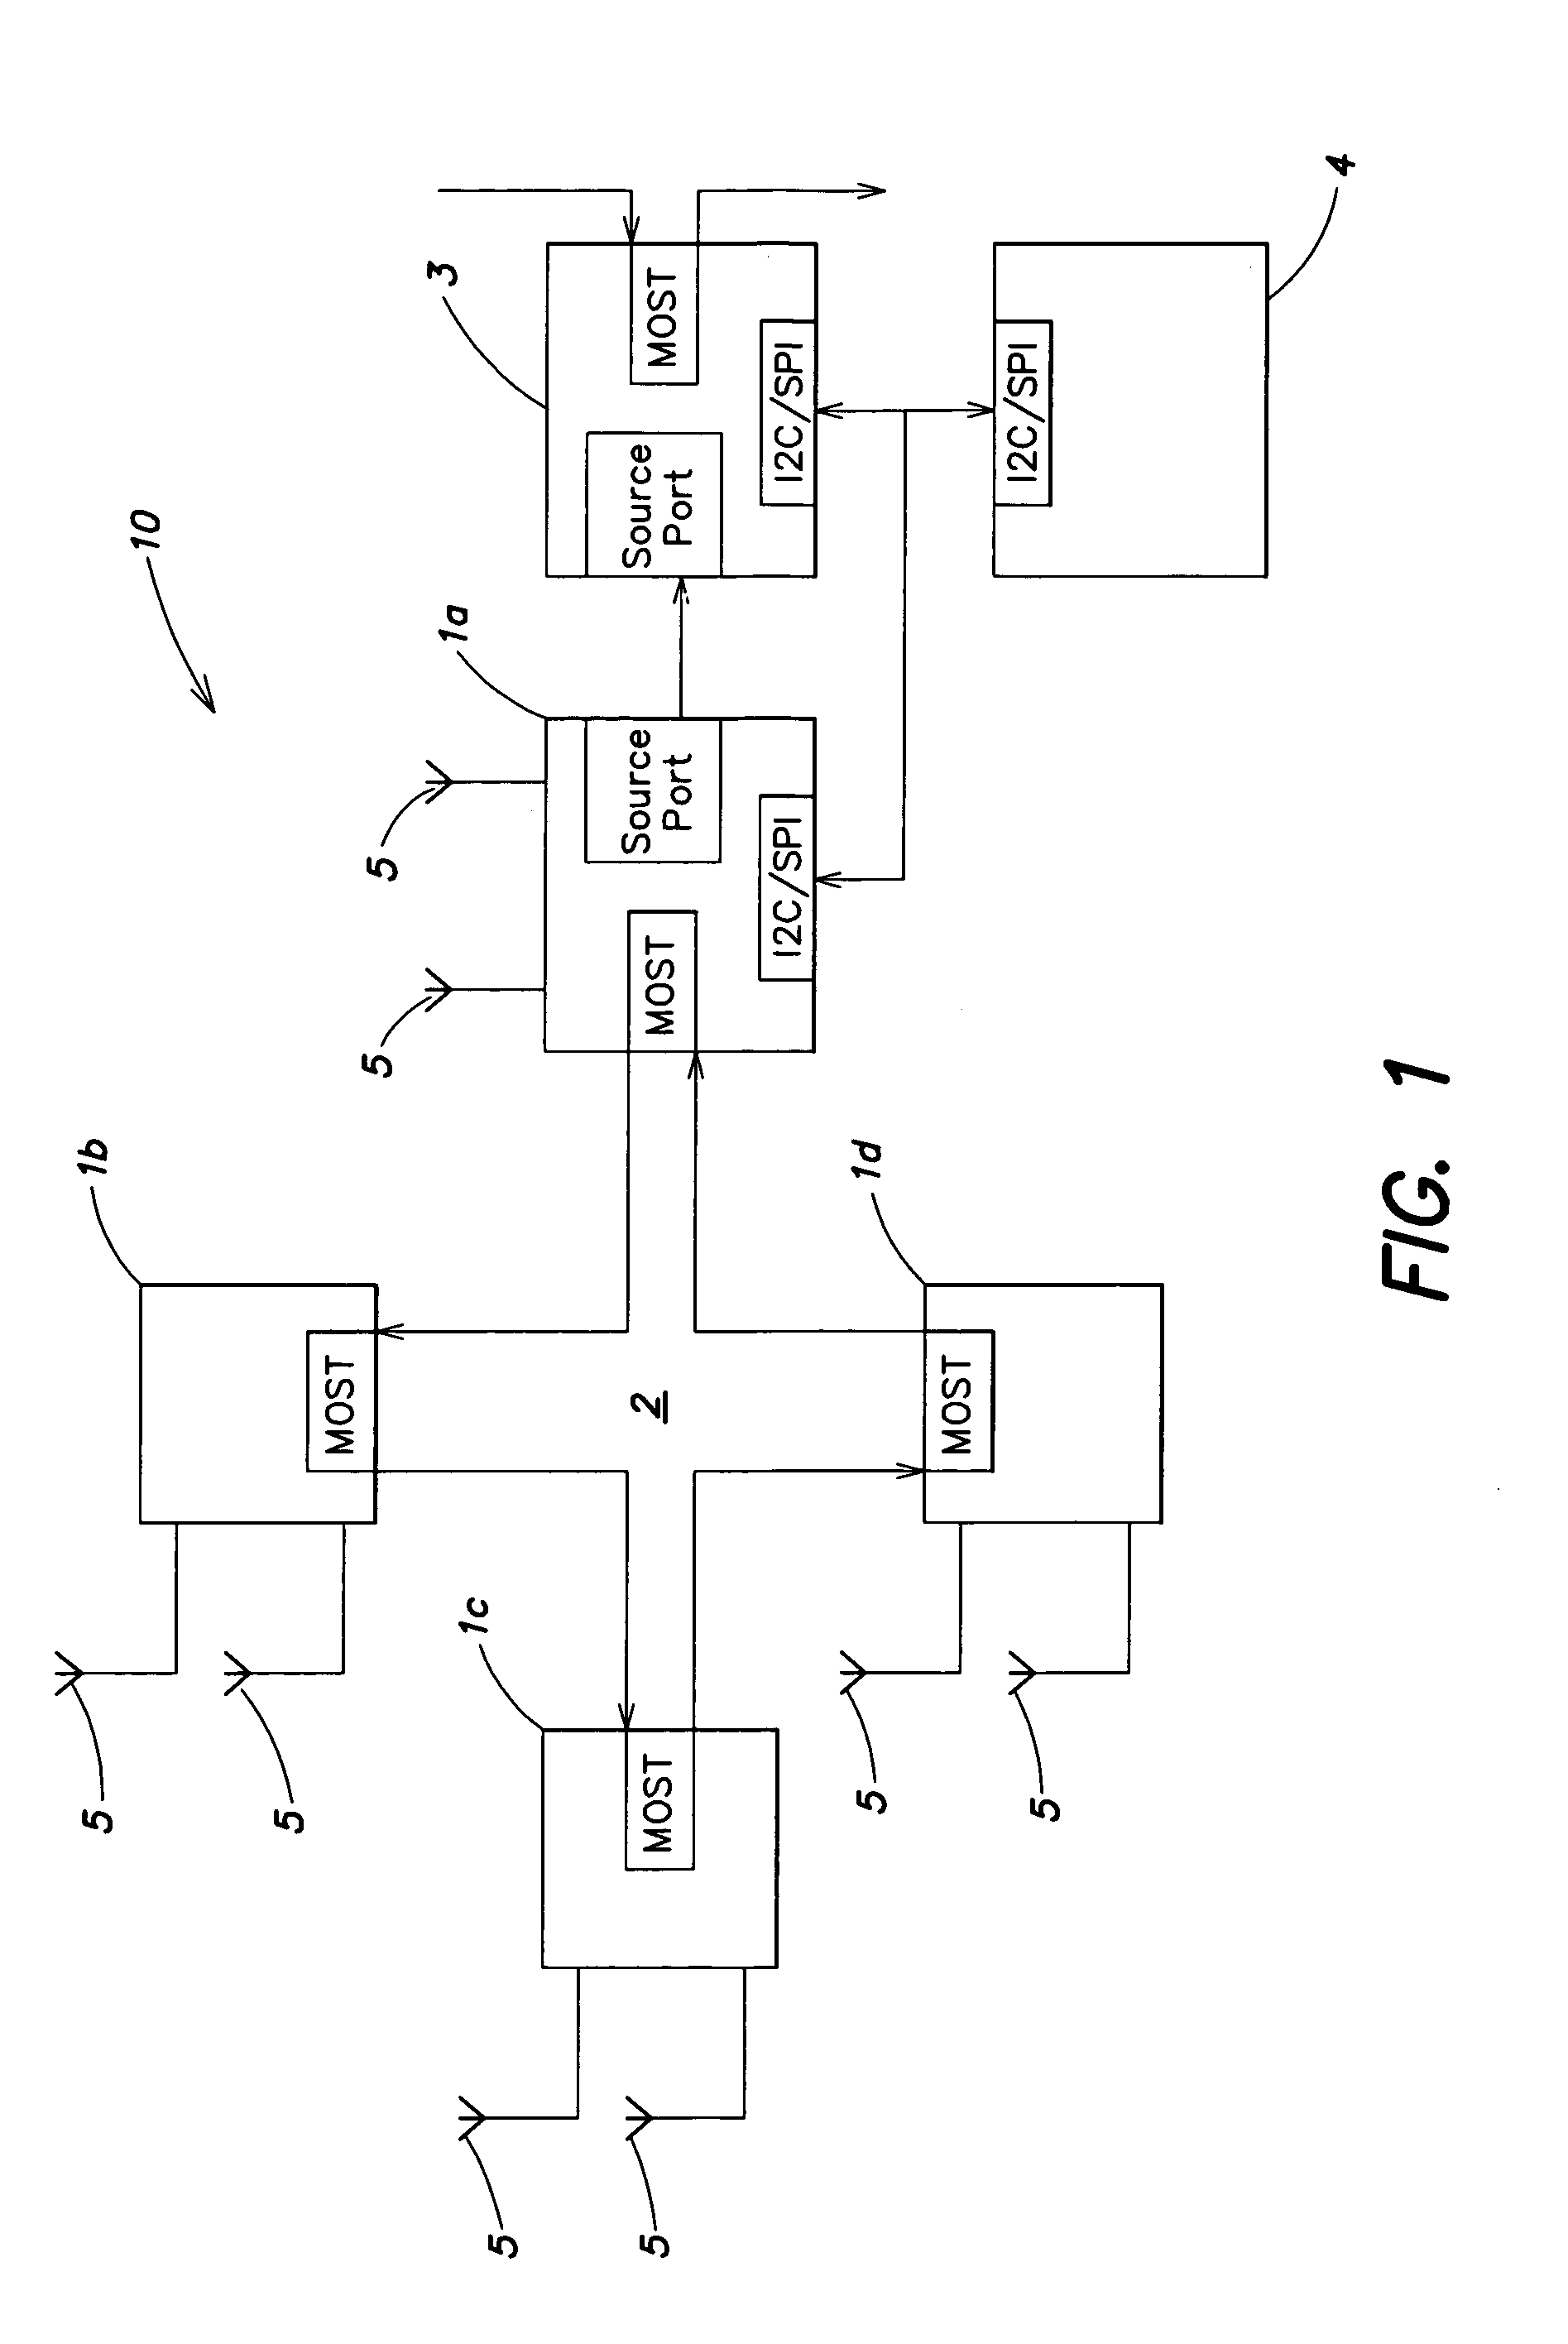 Radio reception system with automatic tuning